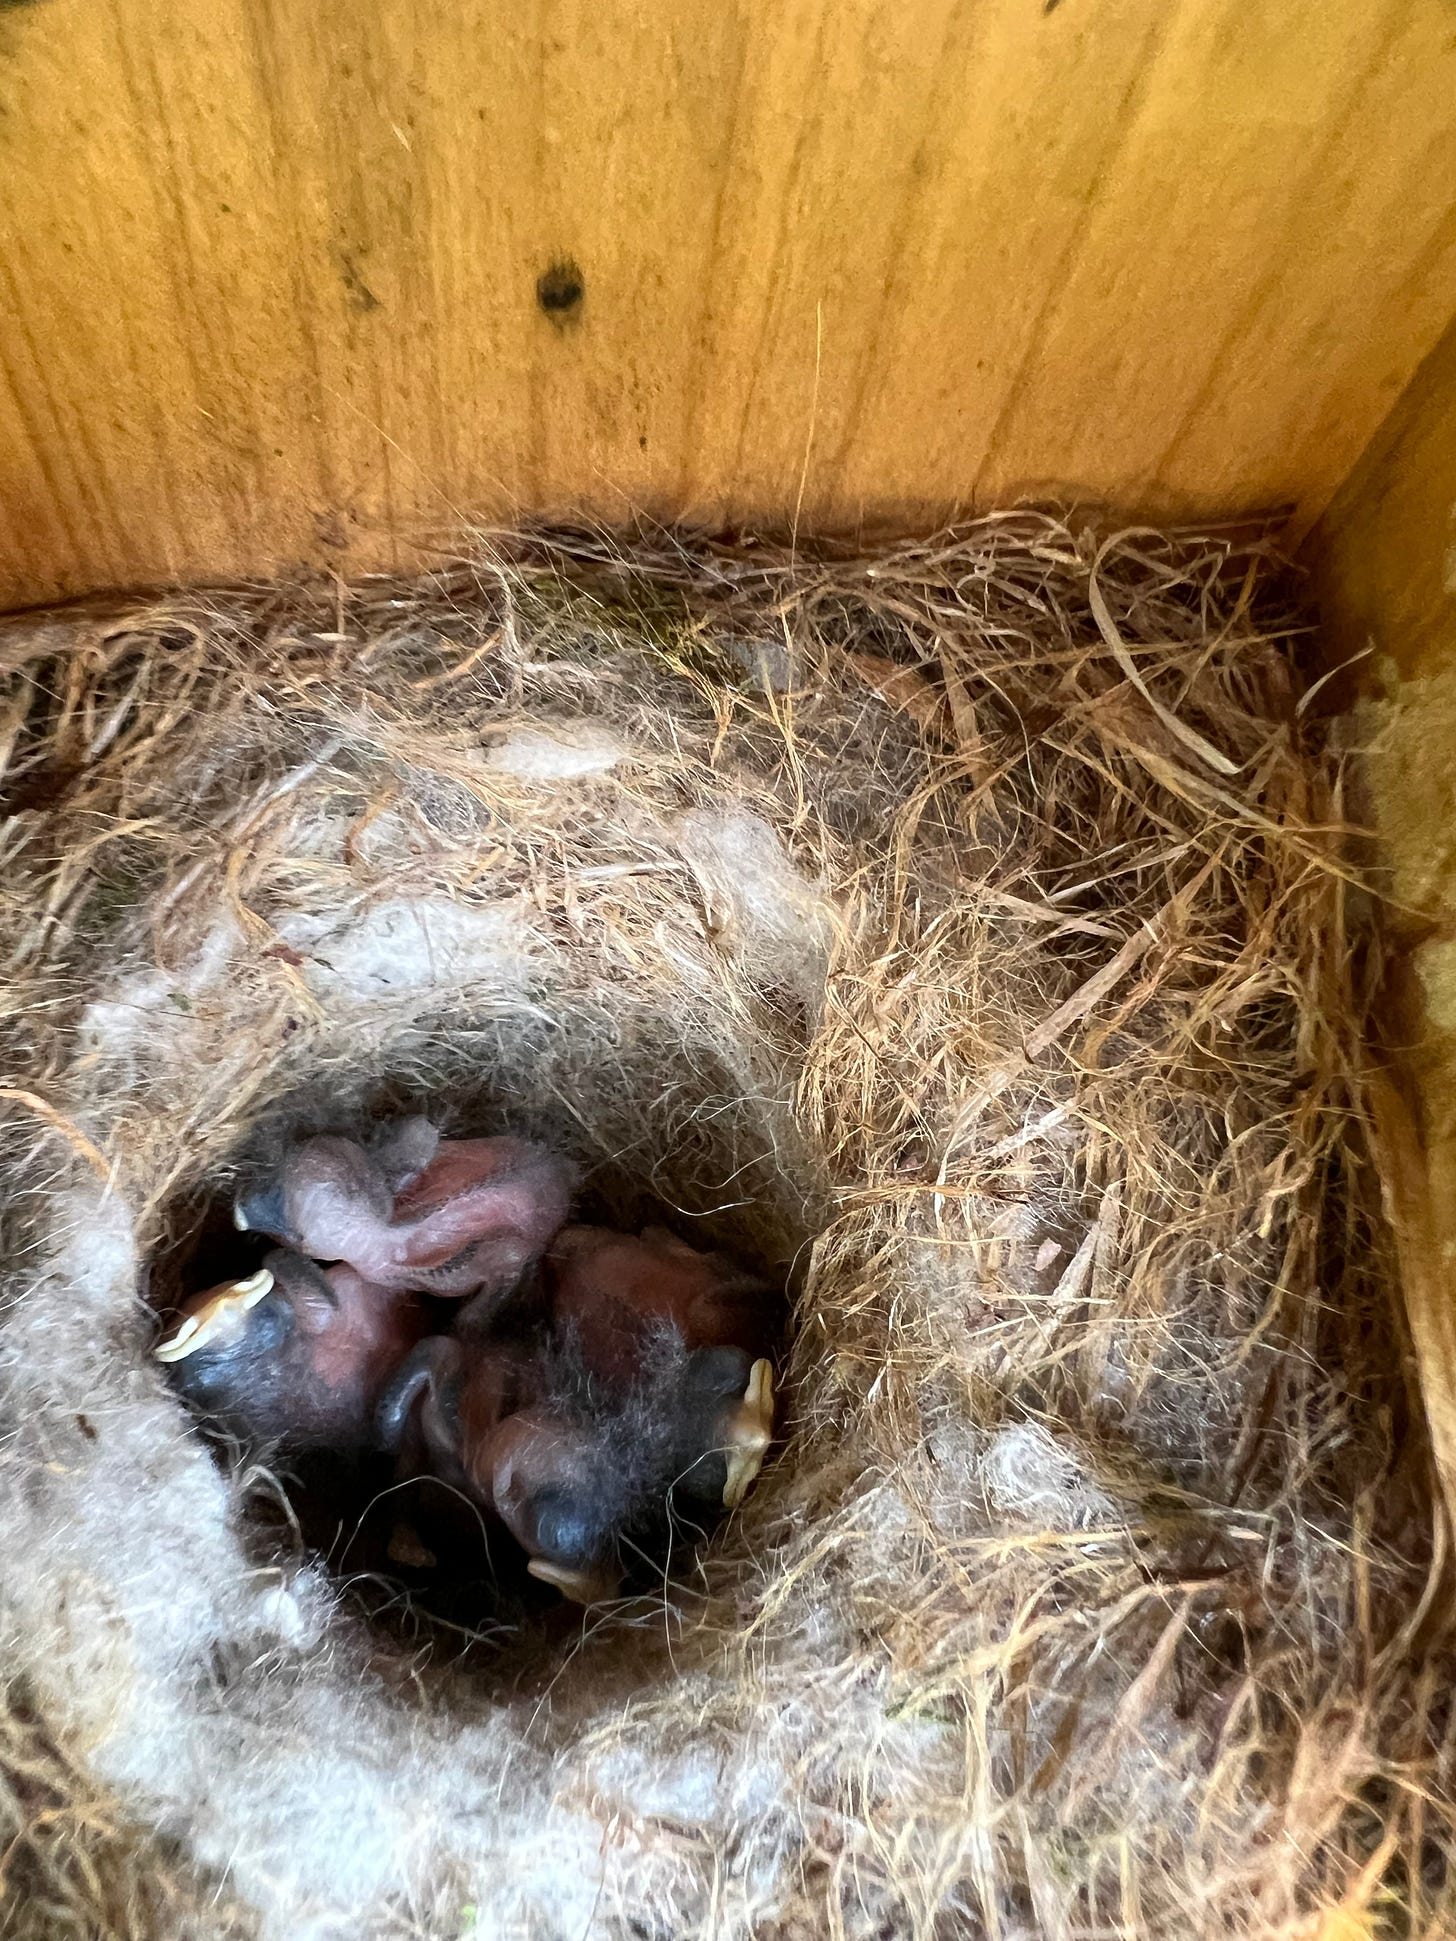 a peek into the chickadee nest with four hairless chicks bunched together in a nest made of grass, hair, moss and straw